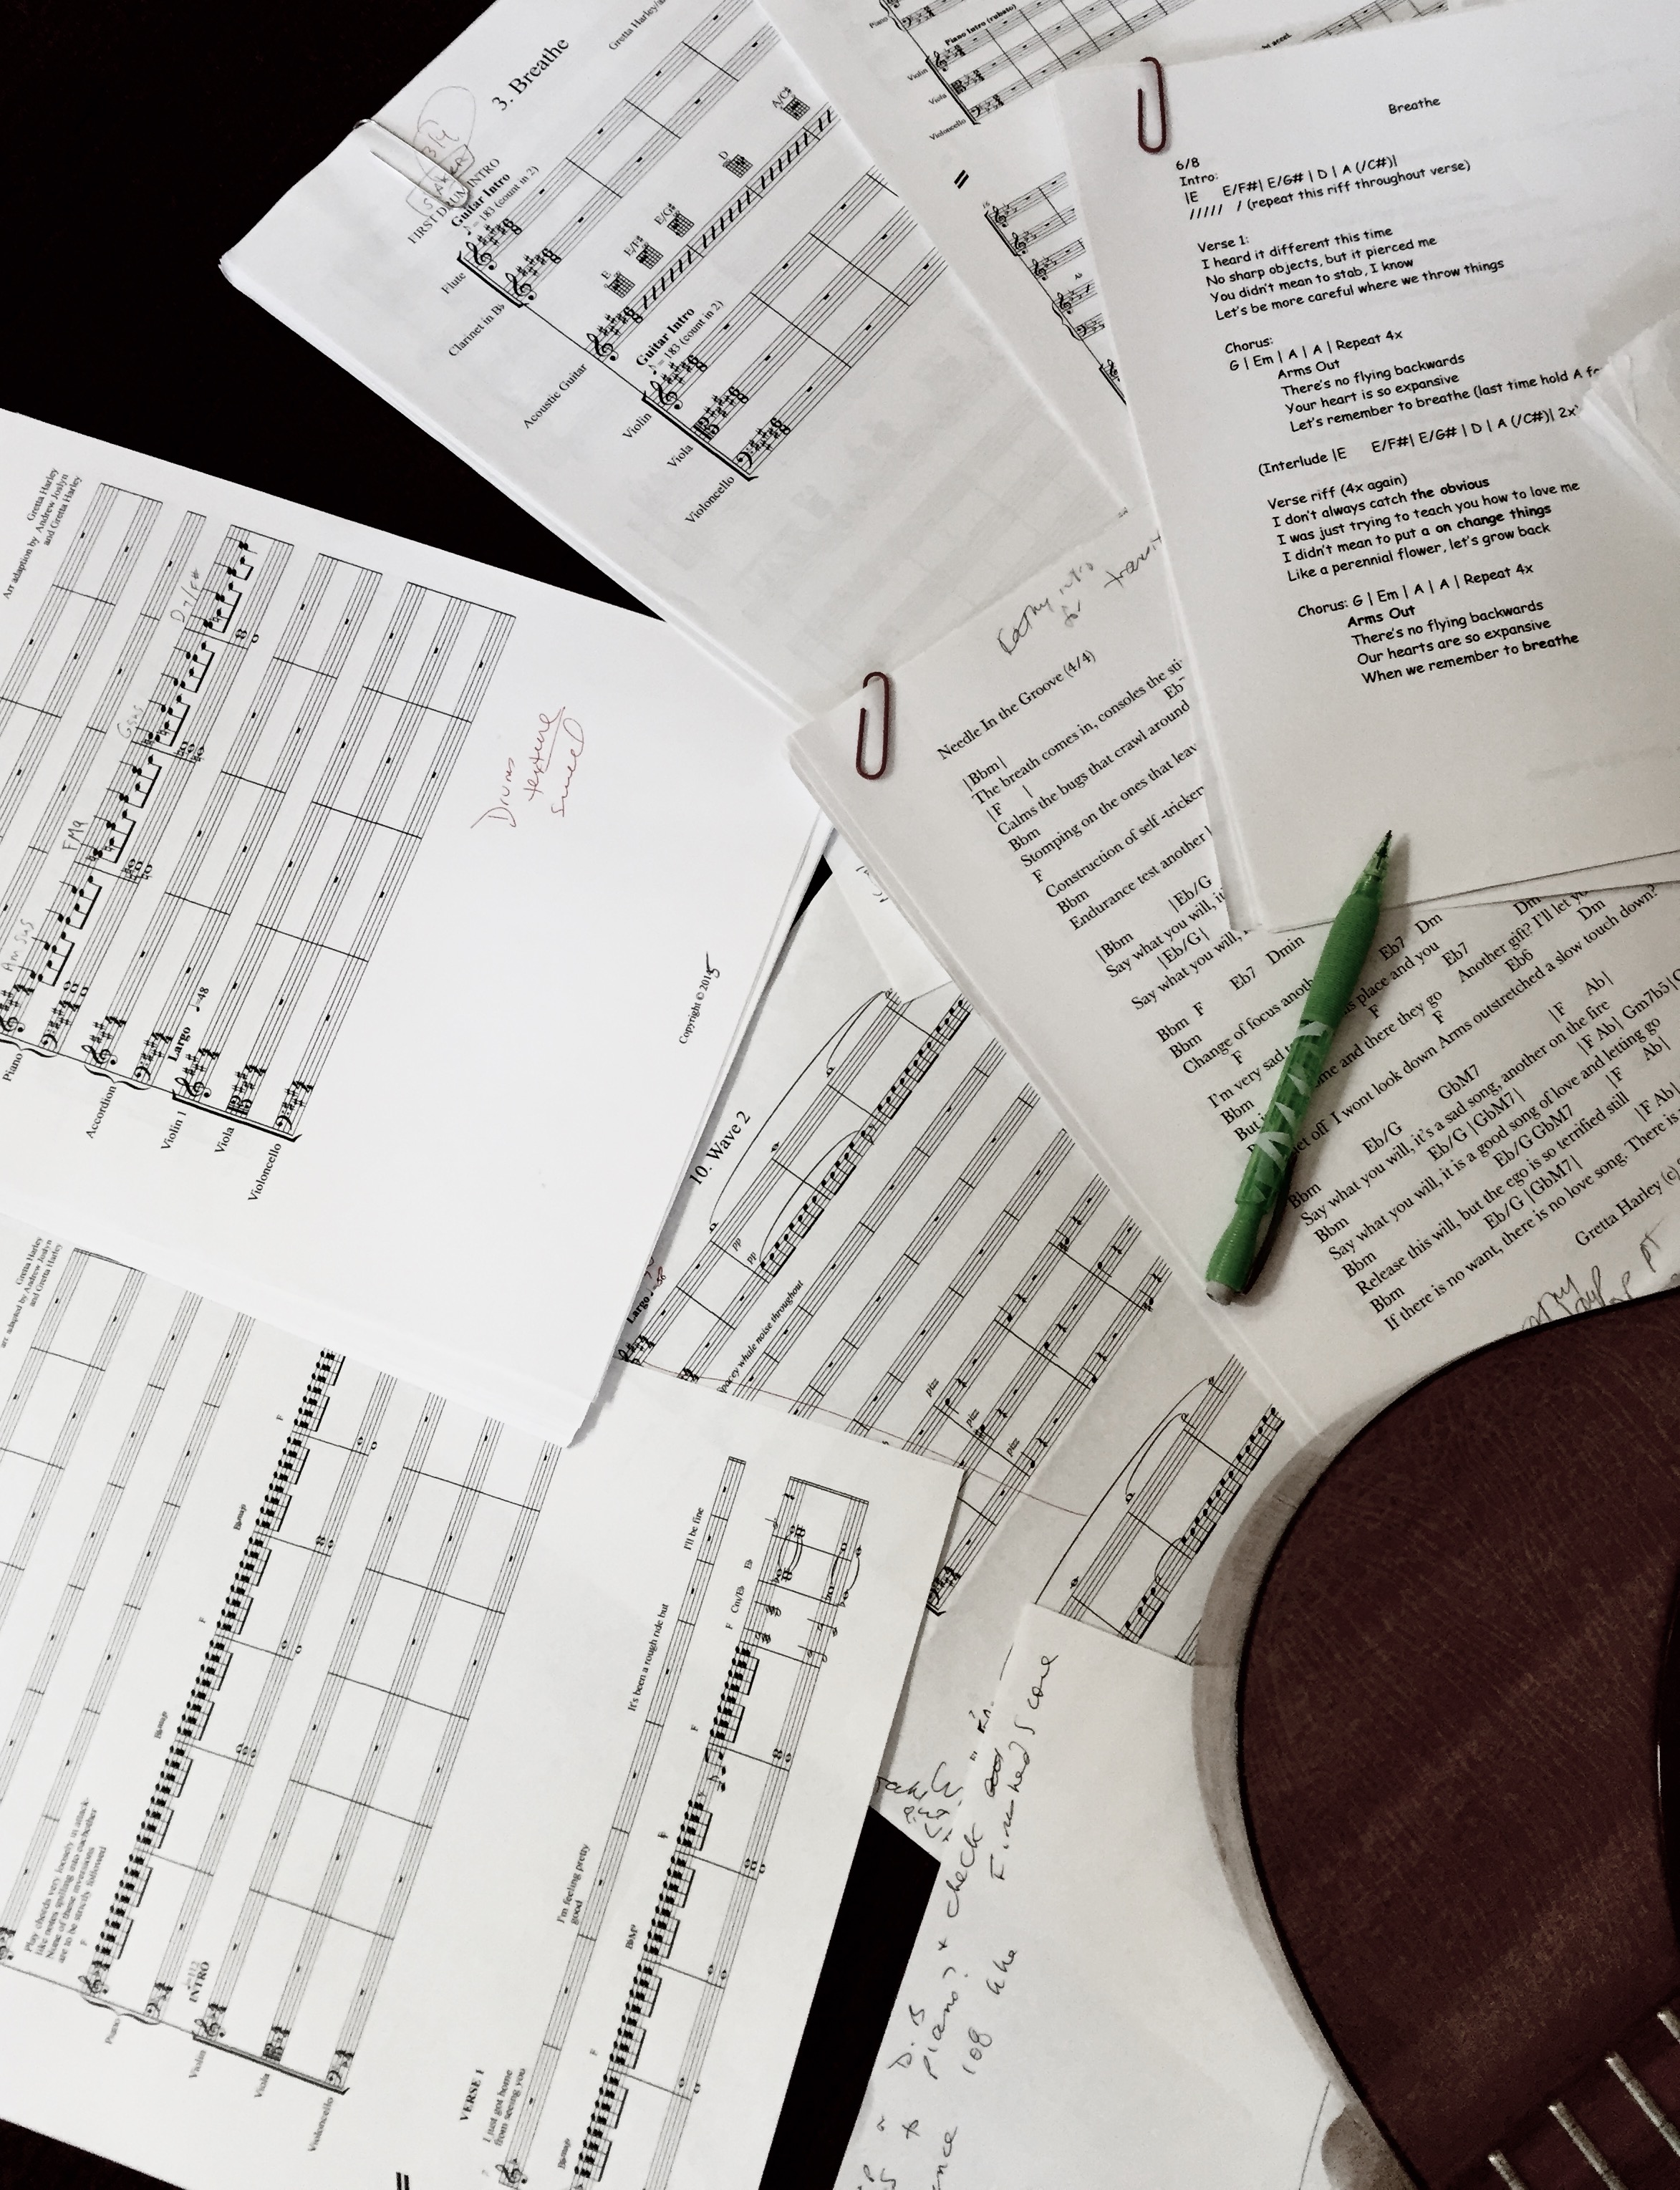 Photo by Angela Castañeda of a group of scores and leadsheets and a pen.